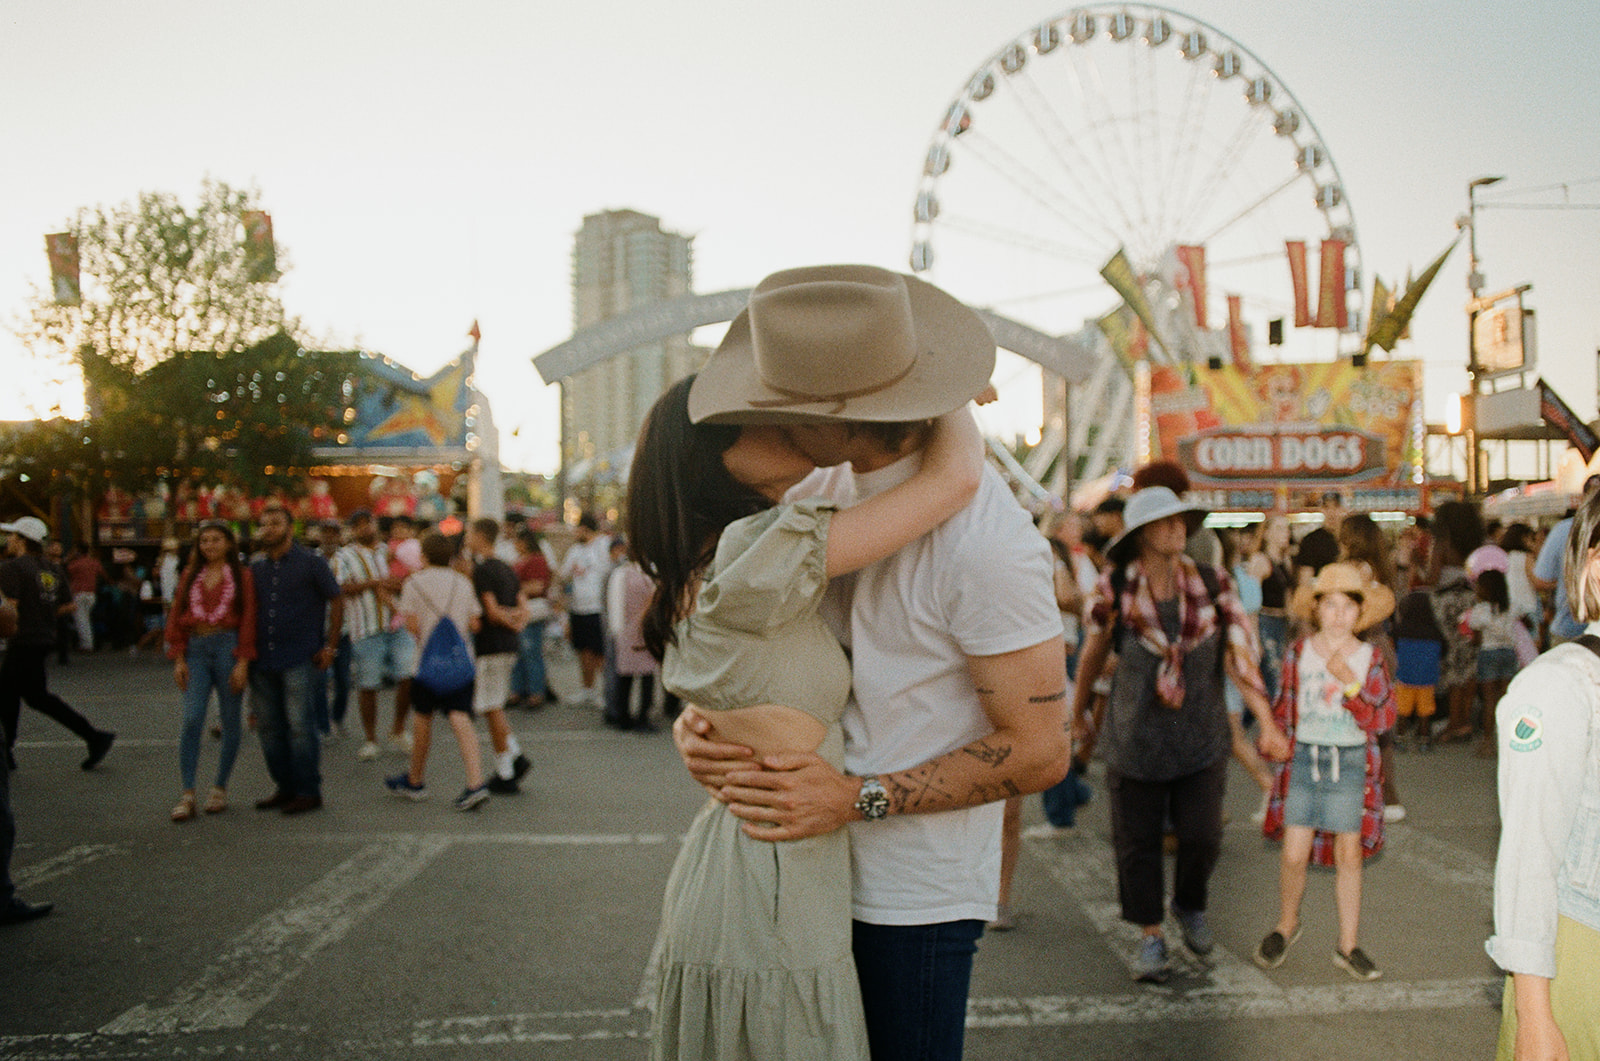 35mm film photo of engaged couple kissing at the calgary alberta stampede